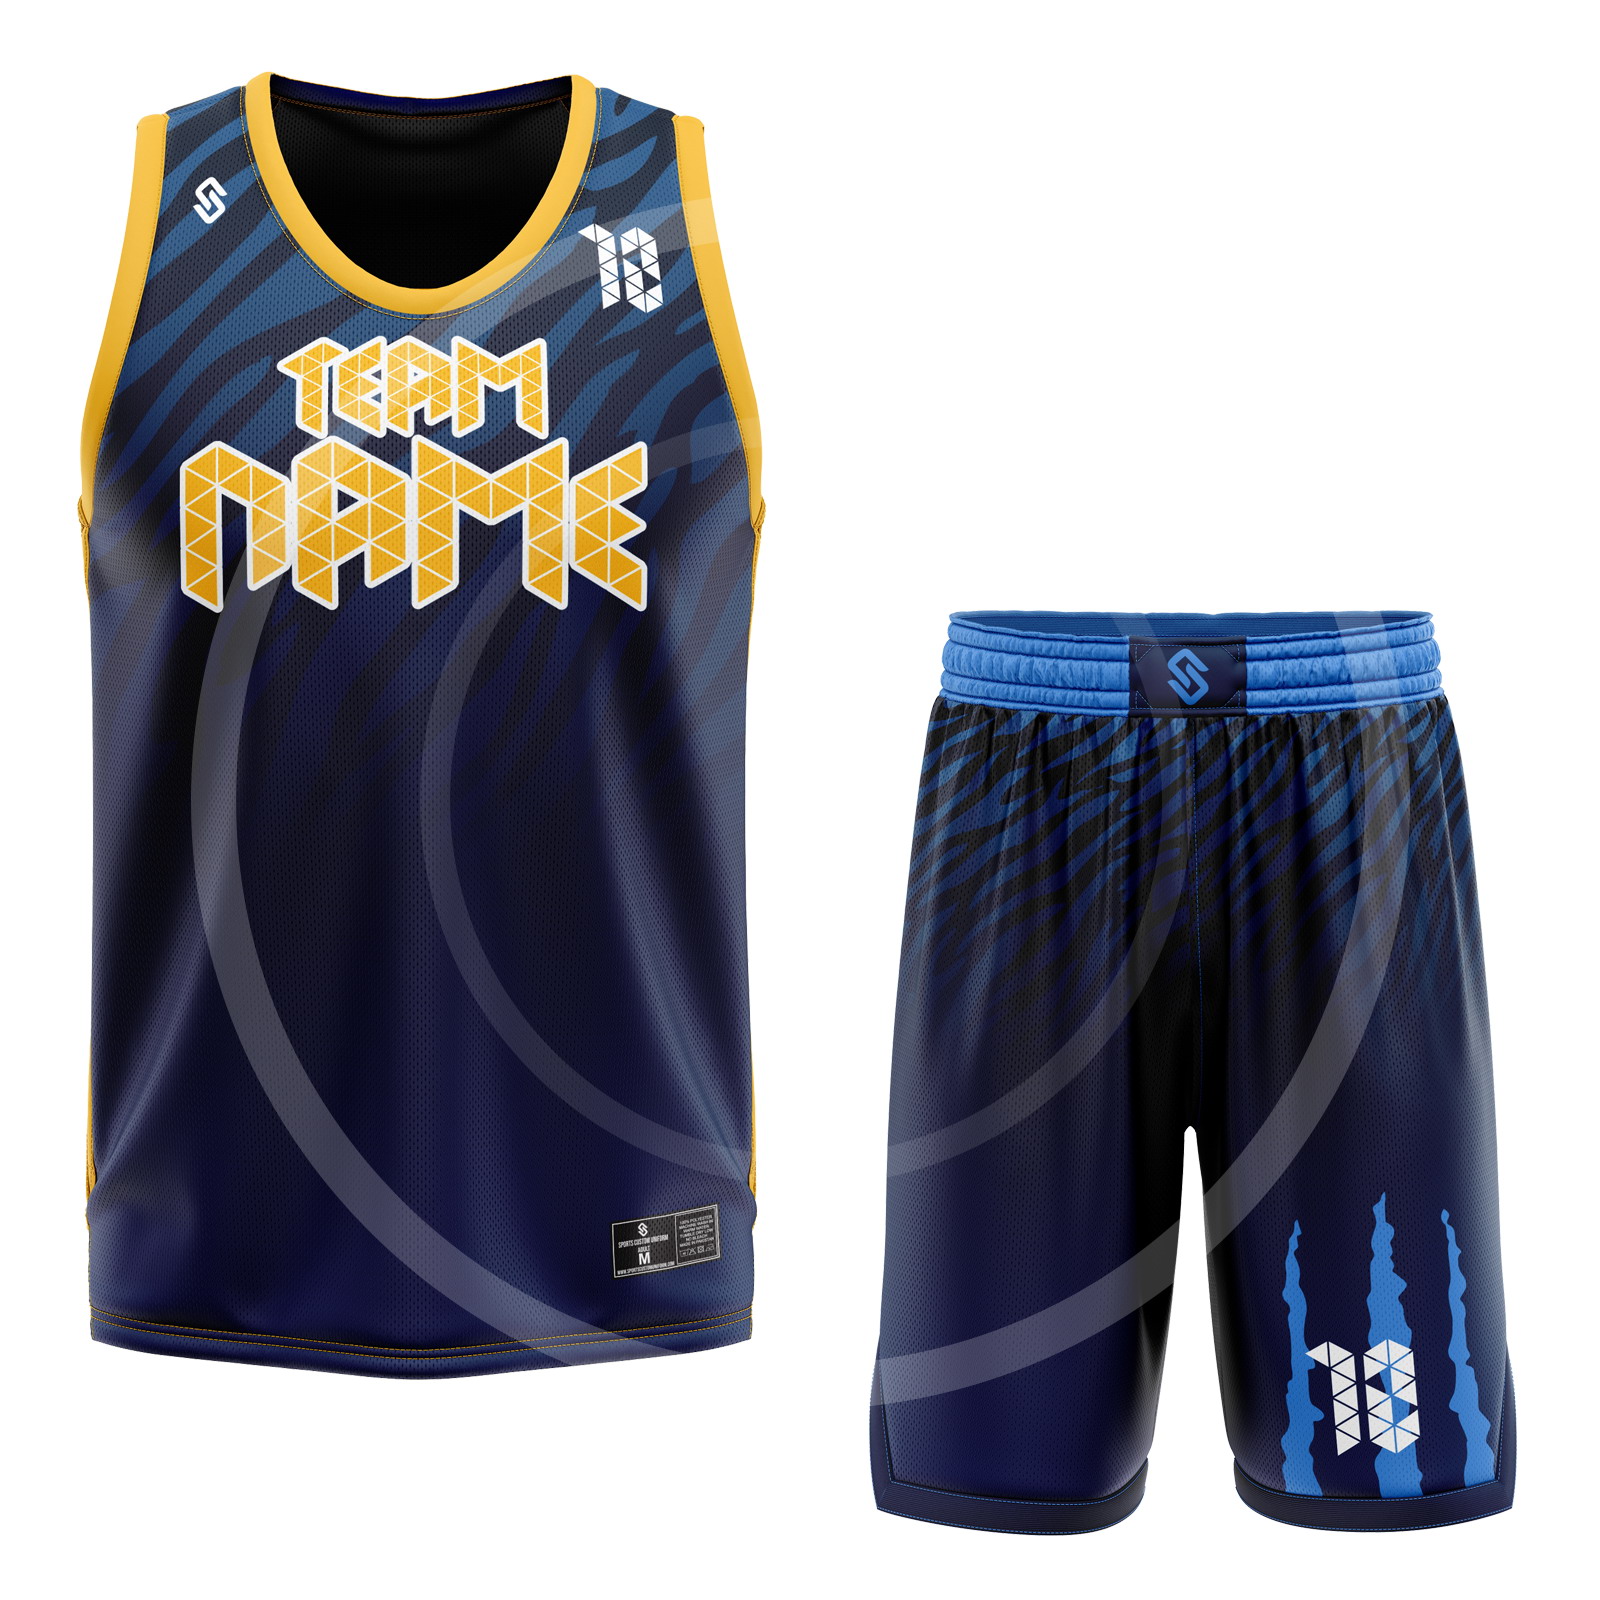 Browse Recent Customer Projects for Basketball Uniforms